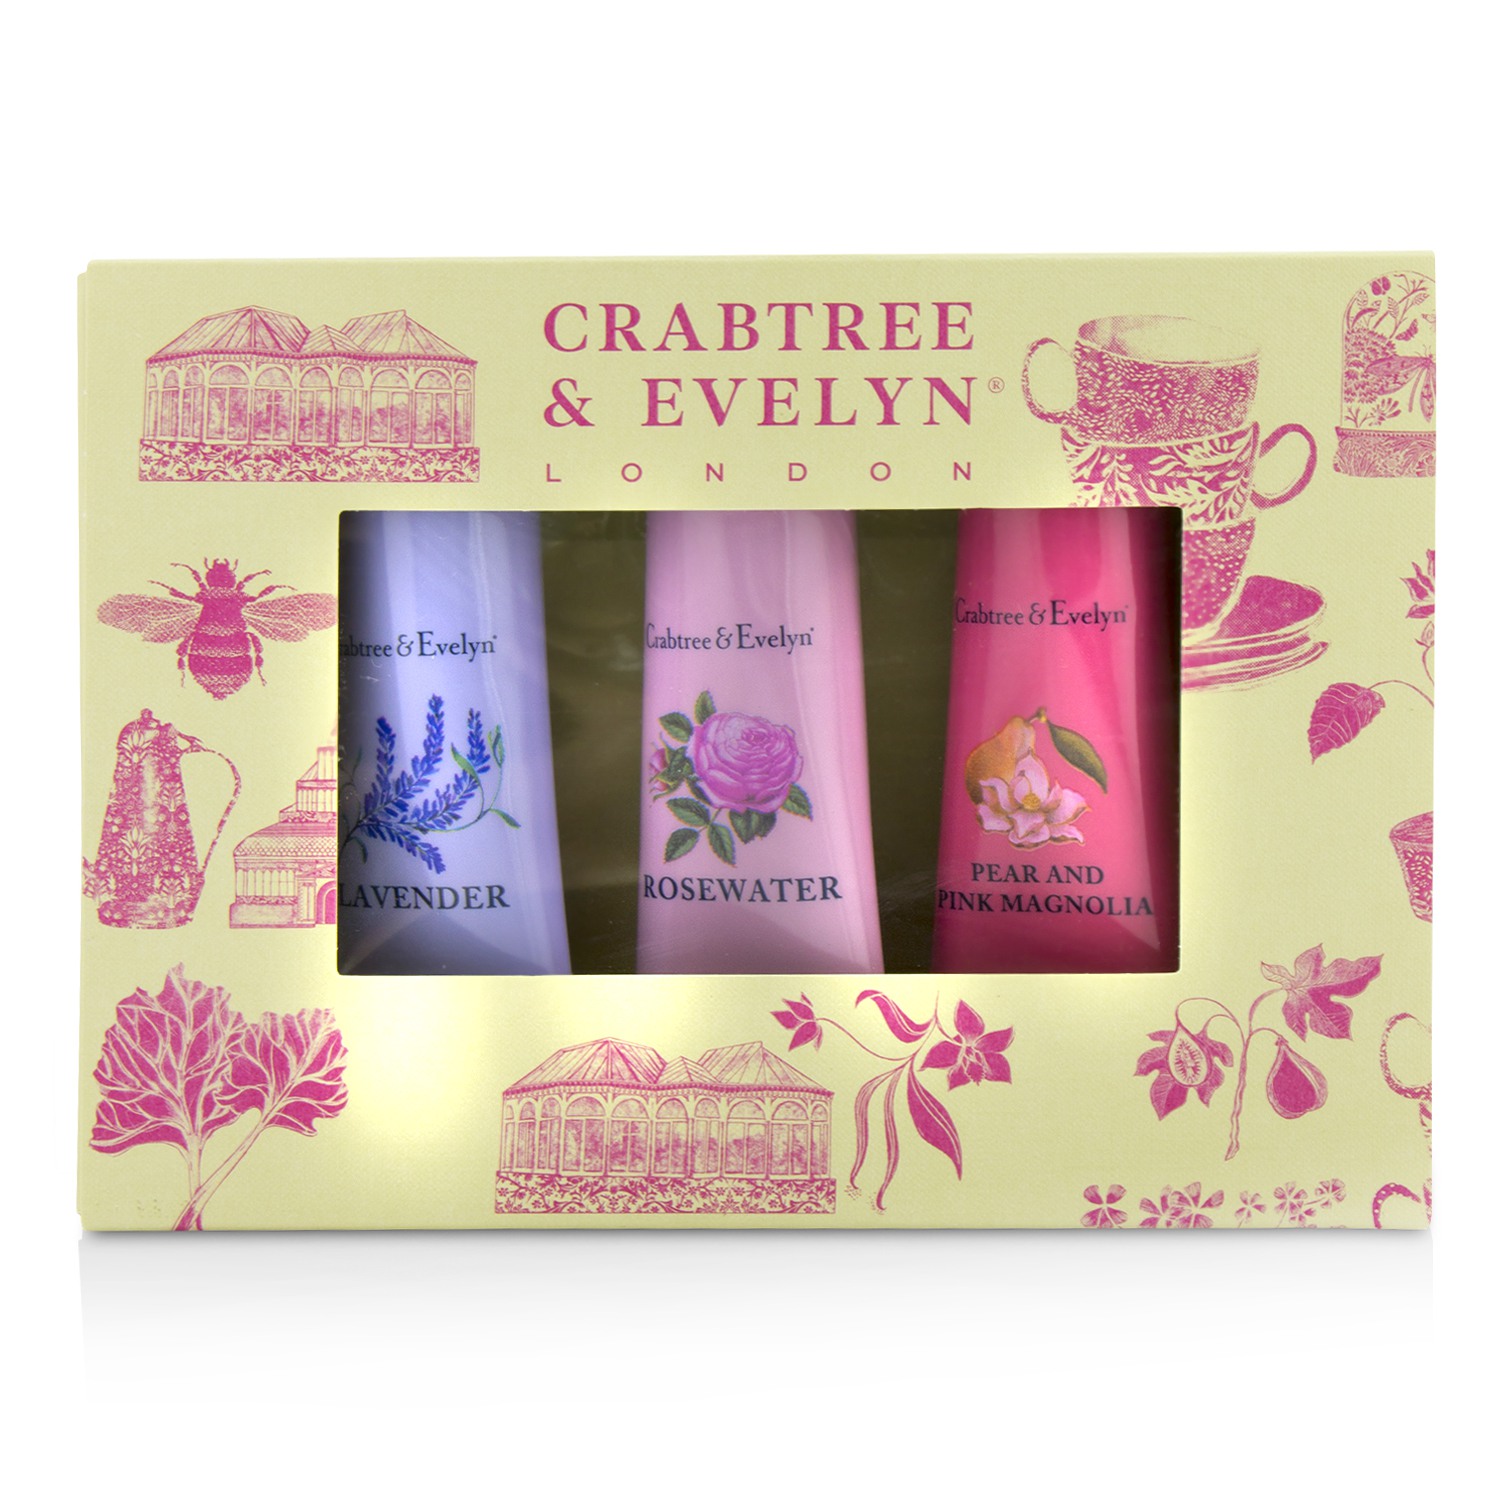 Florals Hand Therapy Set (1x Pear & Pink Magnolia 1x Rosewater 1x Lavender) Crabtree & Evelyn Image